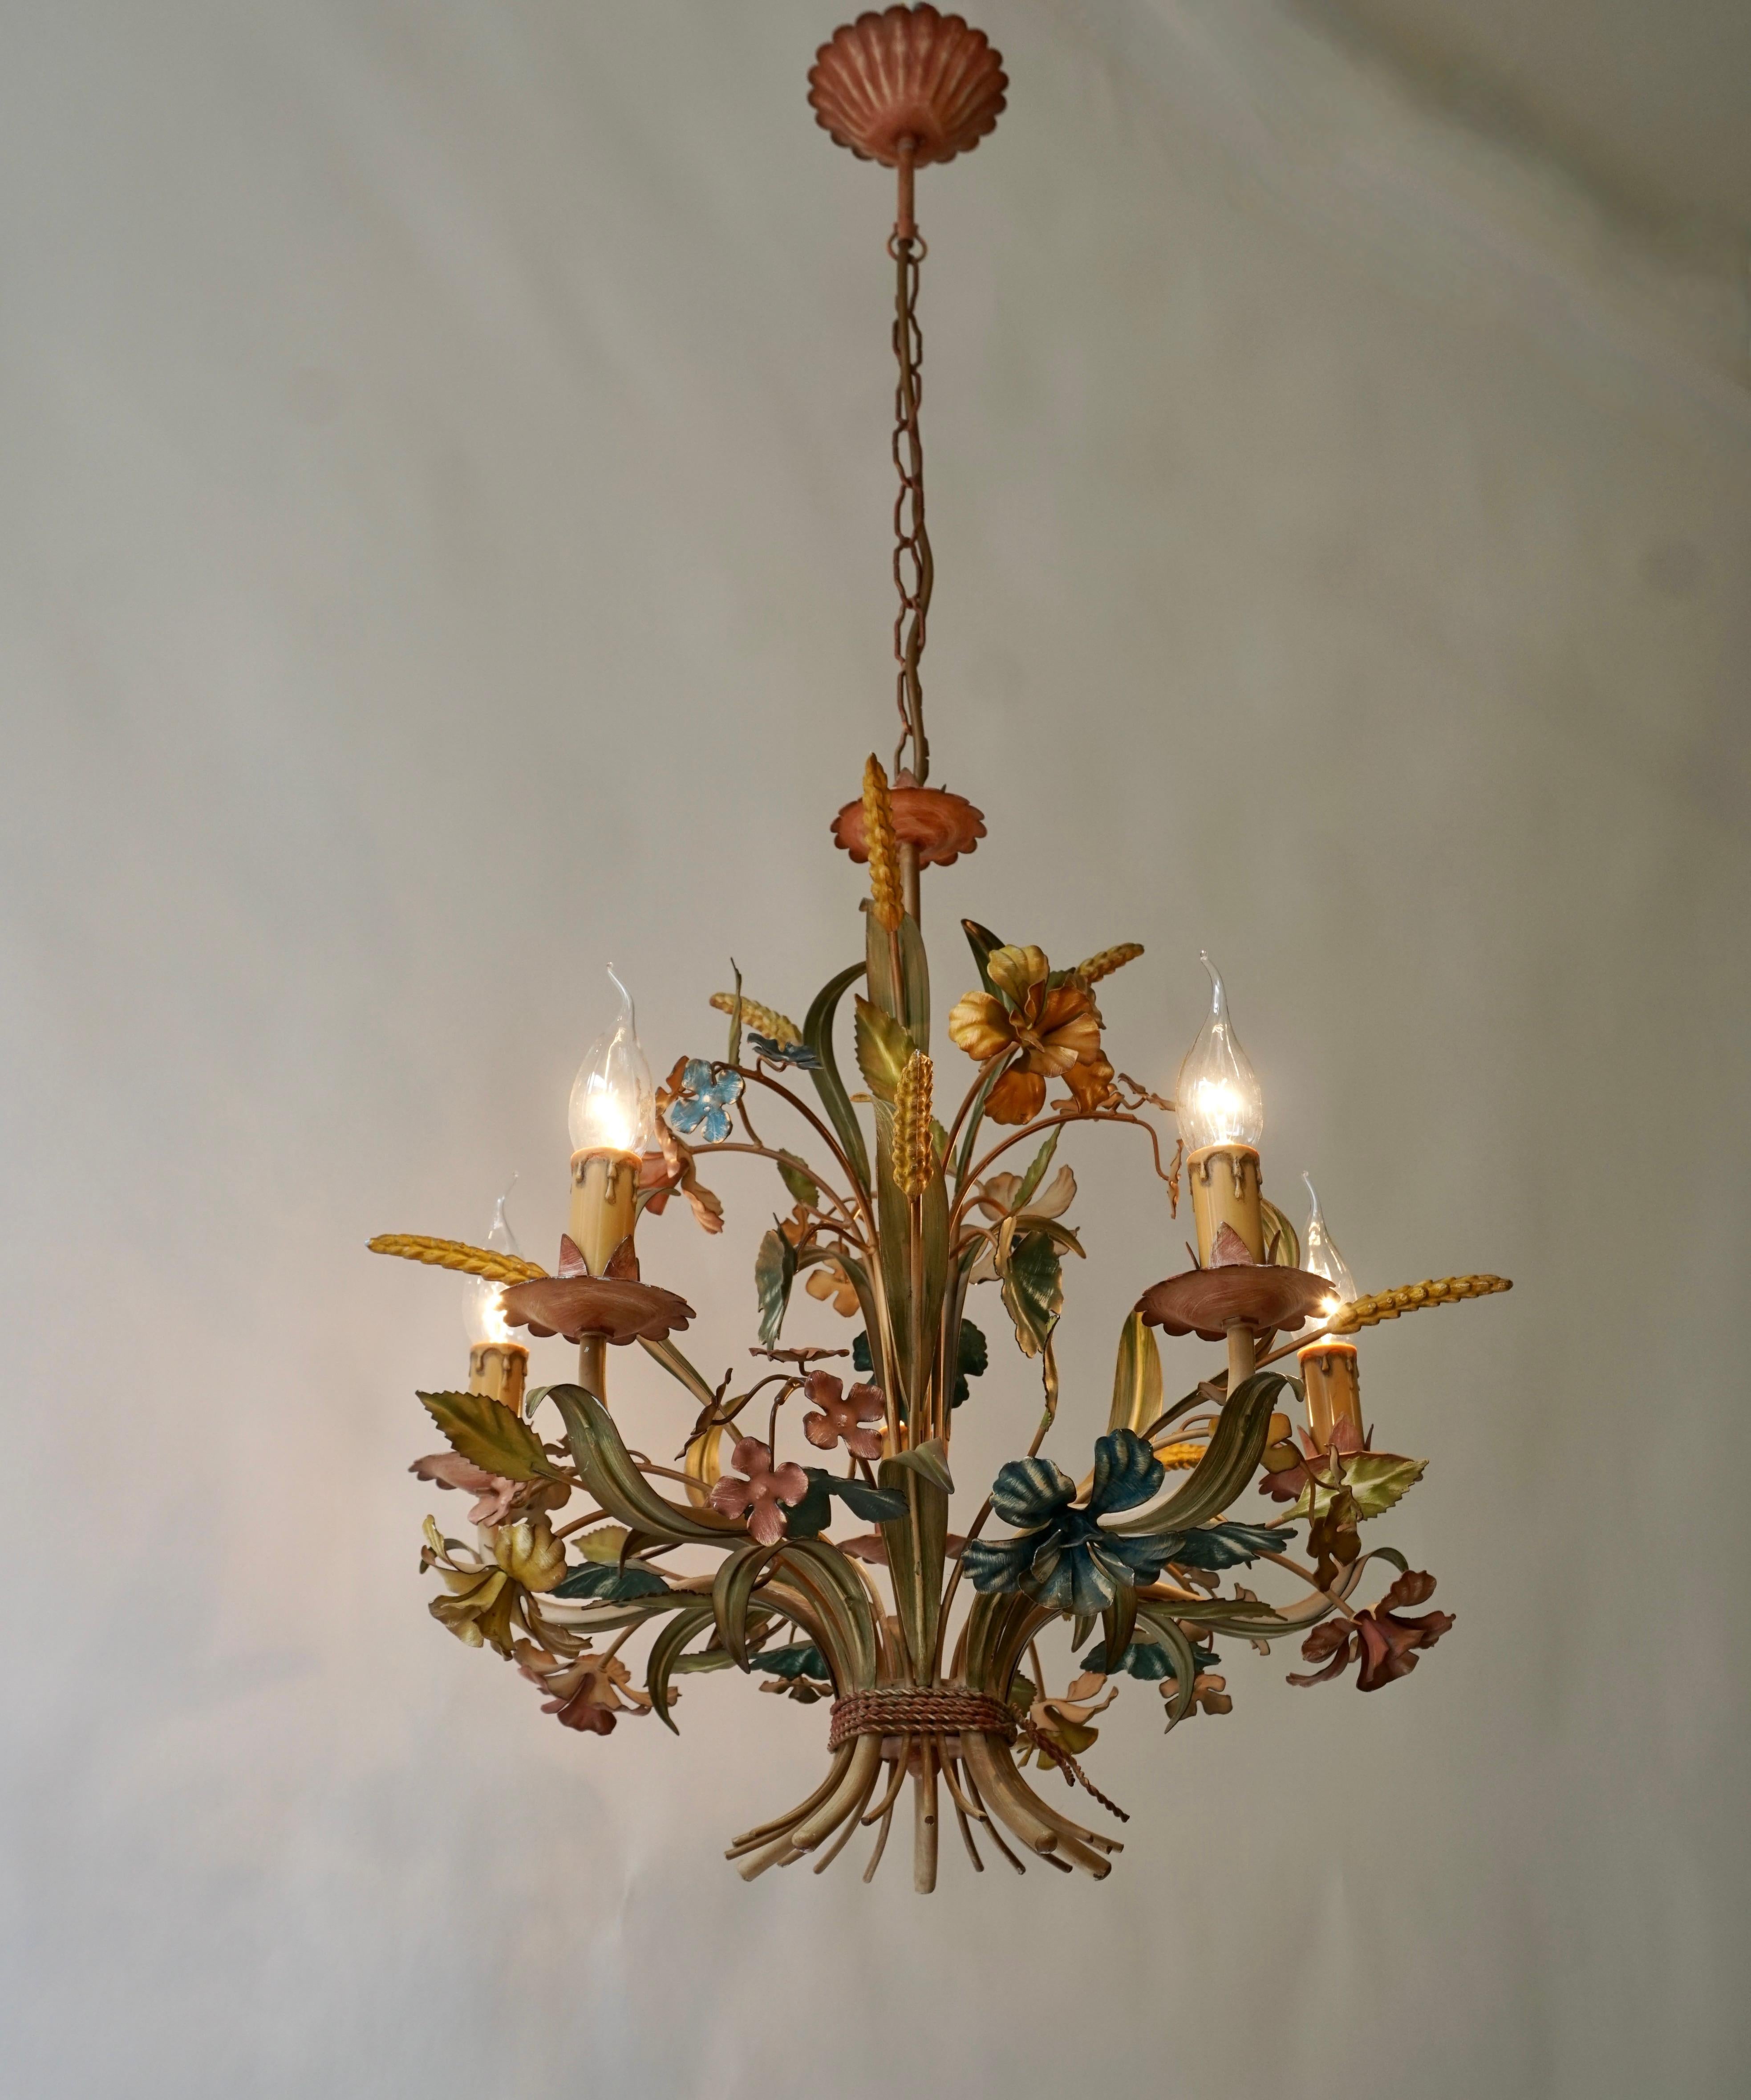 A large vintage tole five-light chandelier flower and leaf accents. Original paint finish in vibrant greens, turquoise and blue,white.

Diameter 19.6